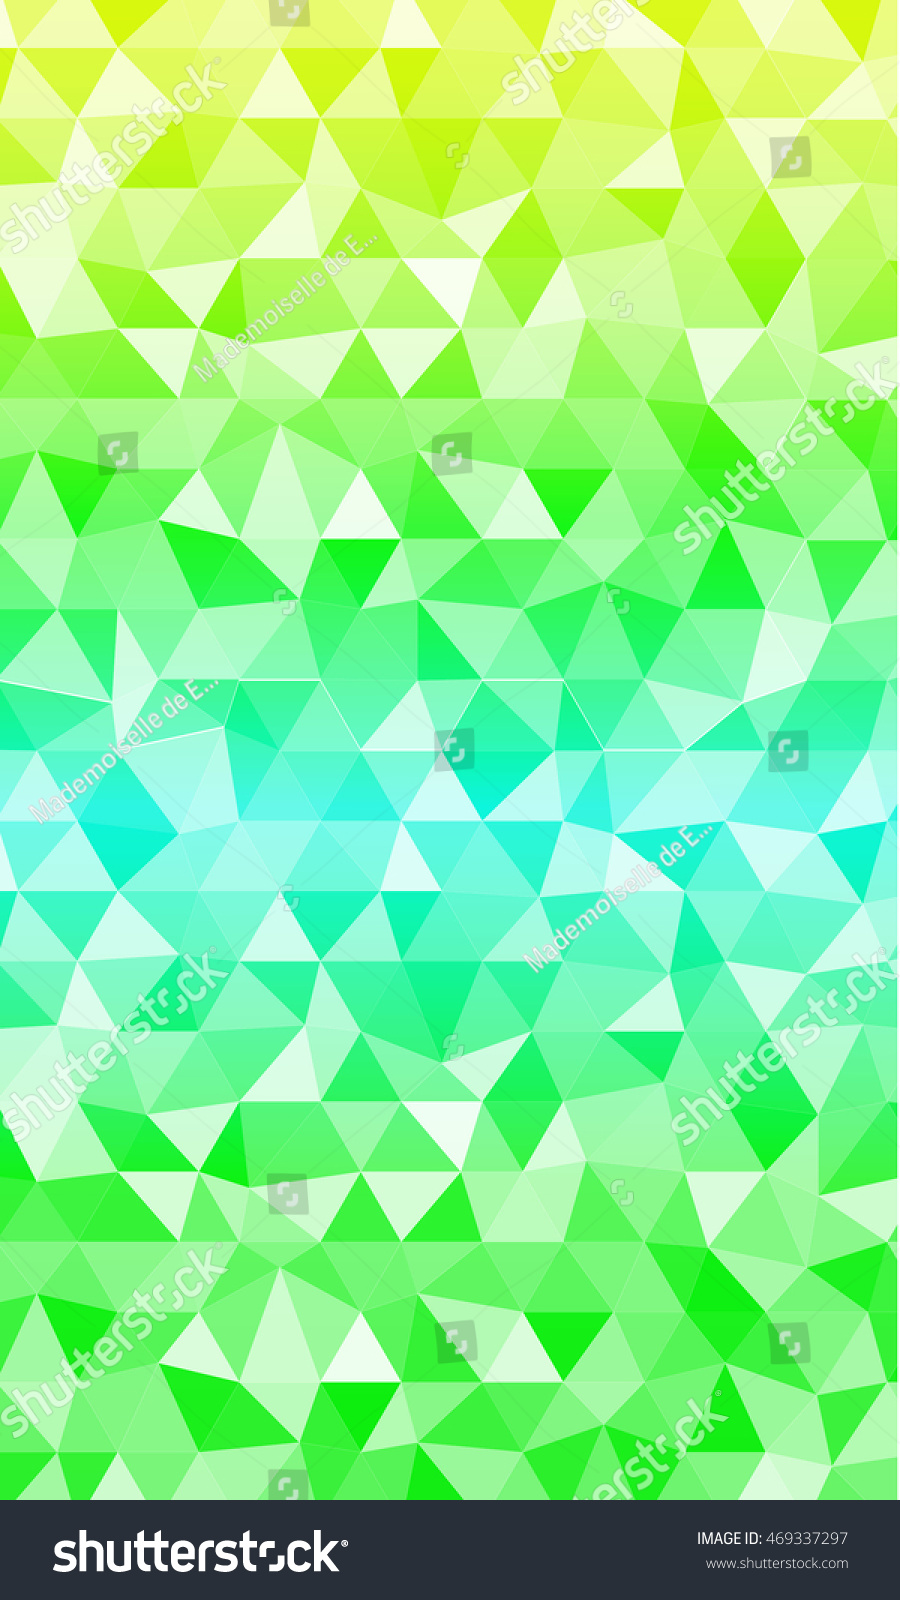 Background Green Triangles Tone Banner Vector Stock Vector 469337297 ...